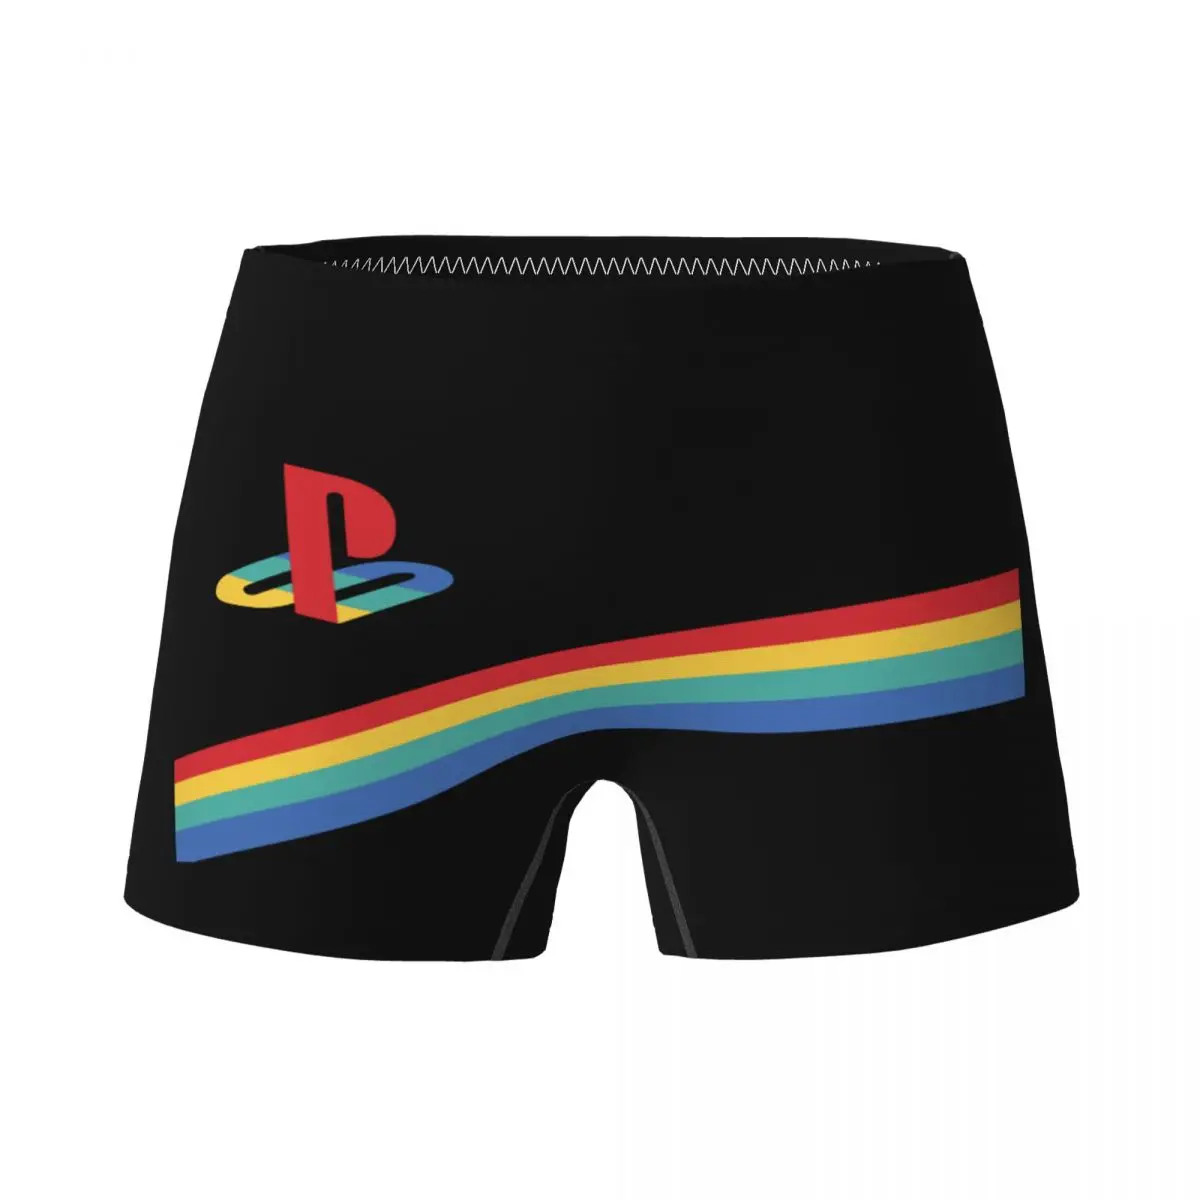 

Game Controler Ps Child Girls Underwear Kids Pretty Boxers Briefs Cotton Teenagers Panties Game Lover Underpants 4-15Y